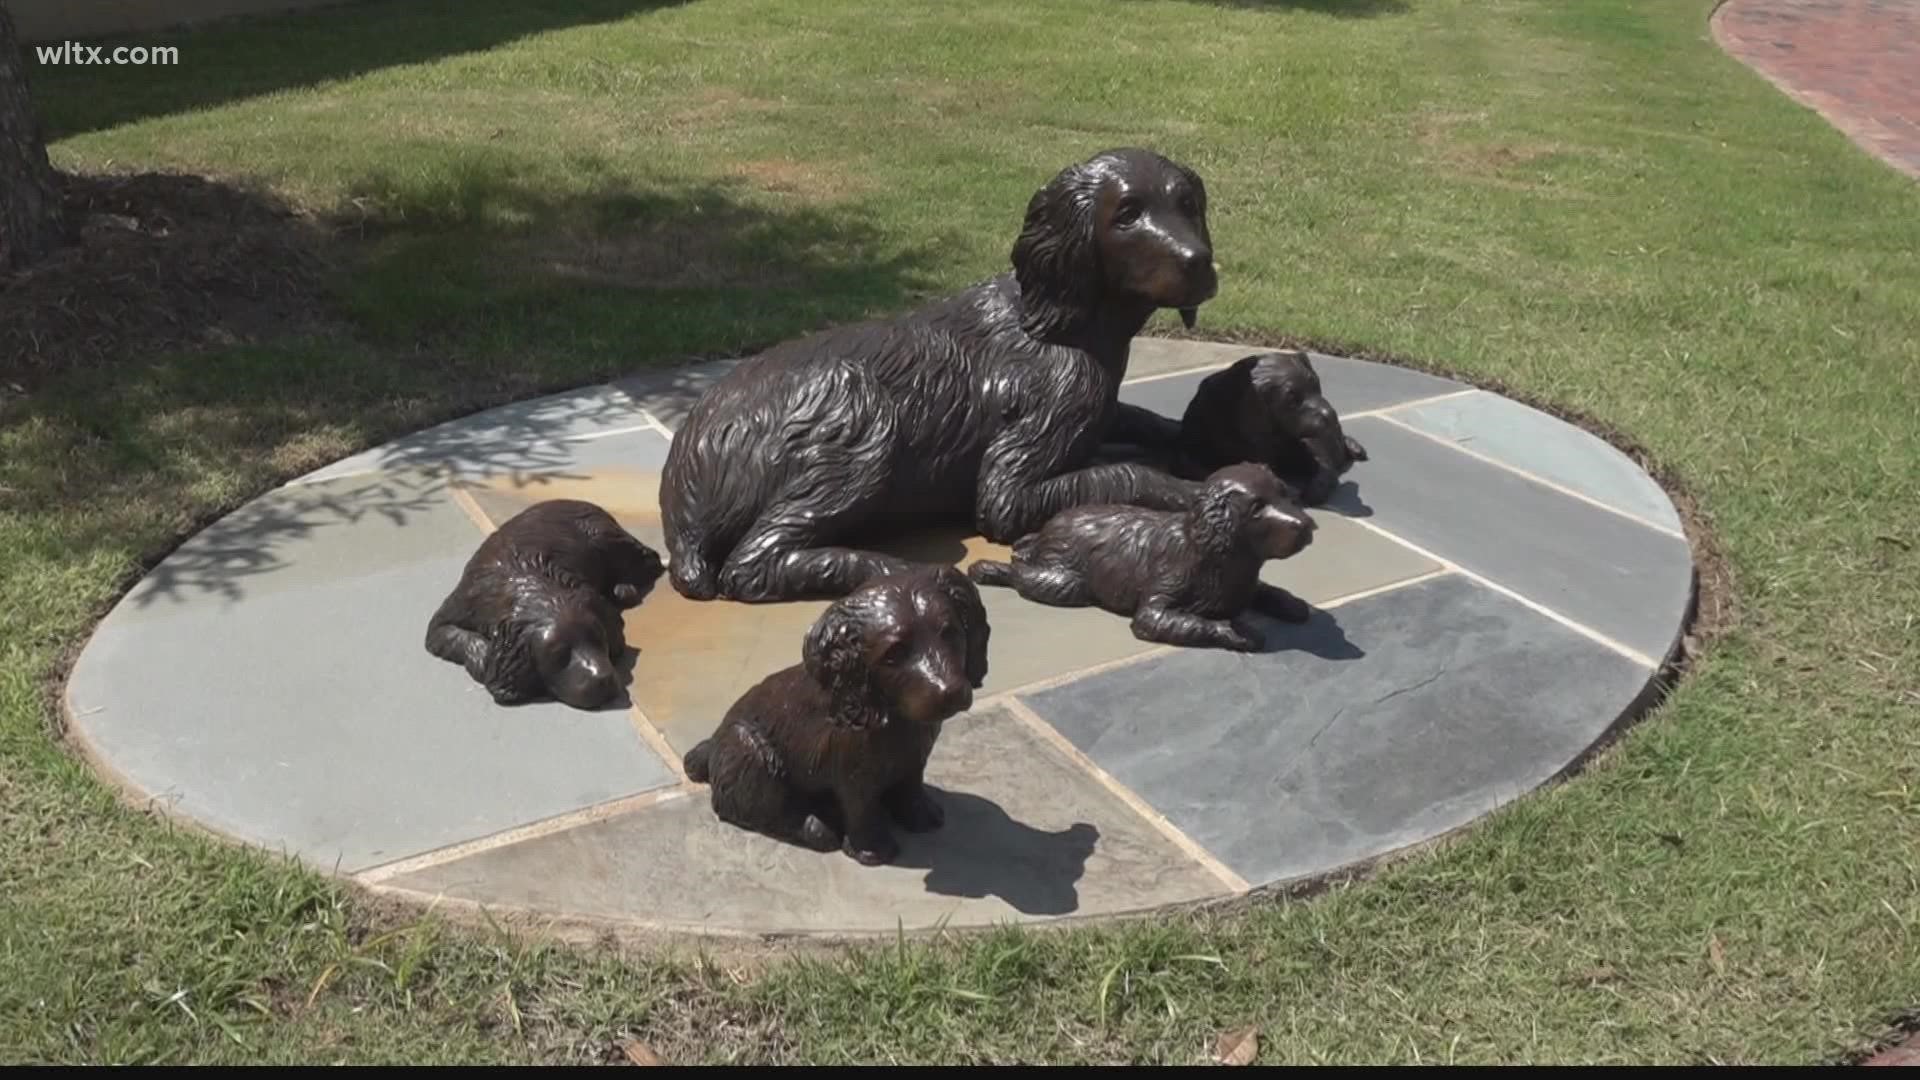 Those wanting to take part in the tour across town can visit the revolutionary war visitor center and take a hunt across the town for the Boykin Spaniel!!